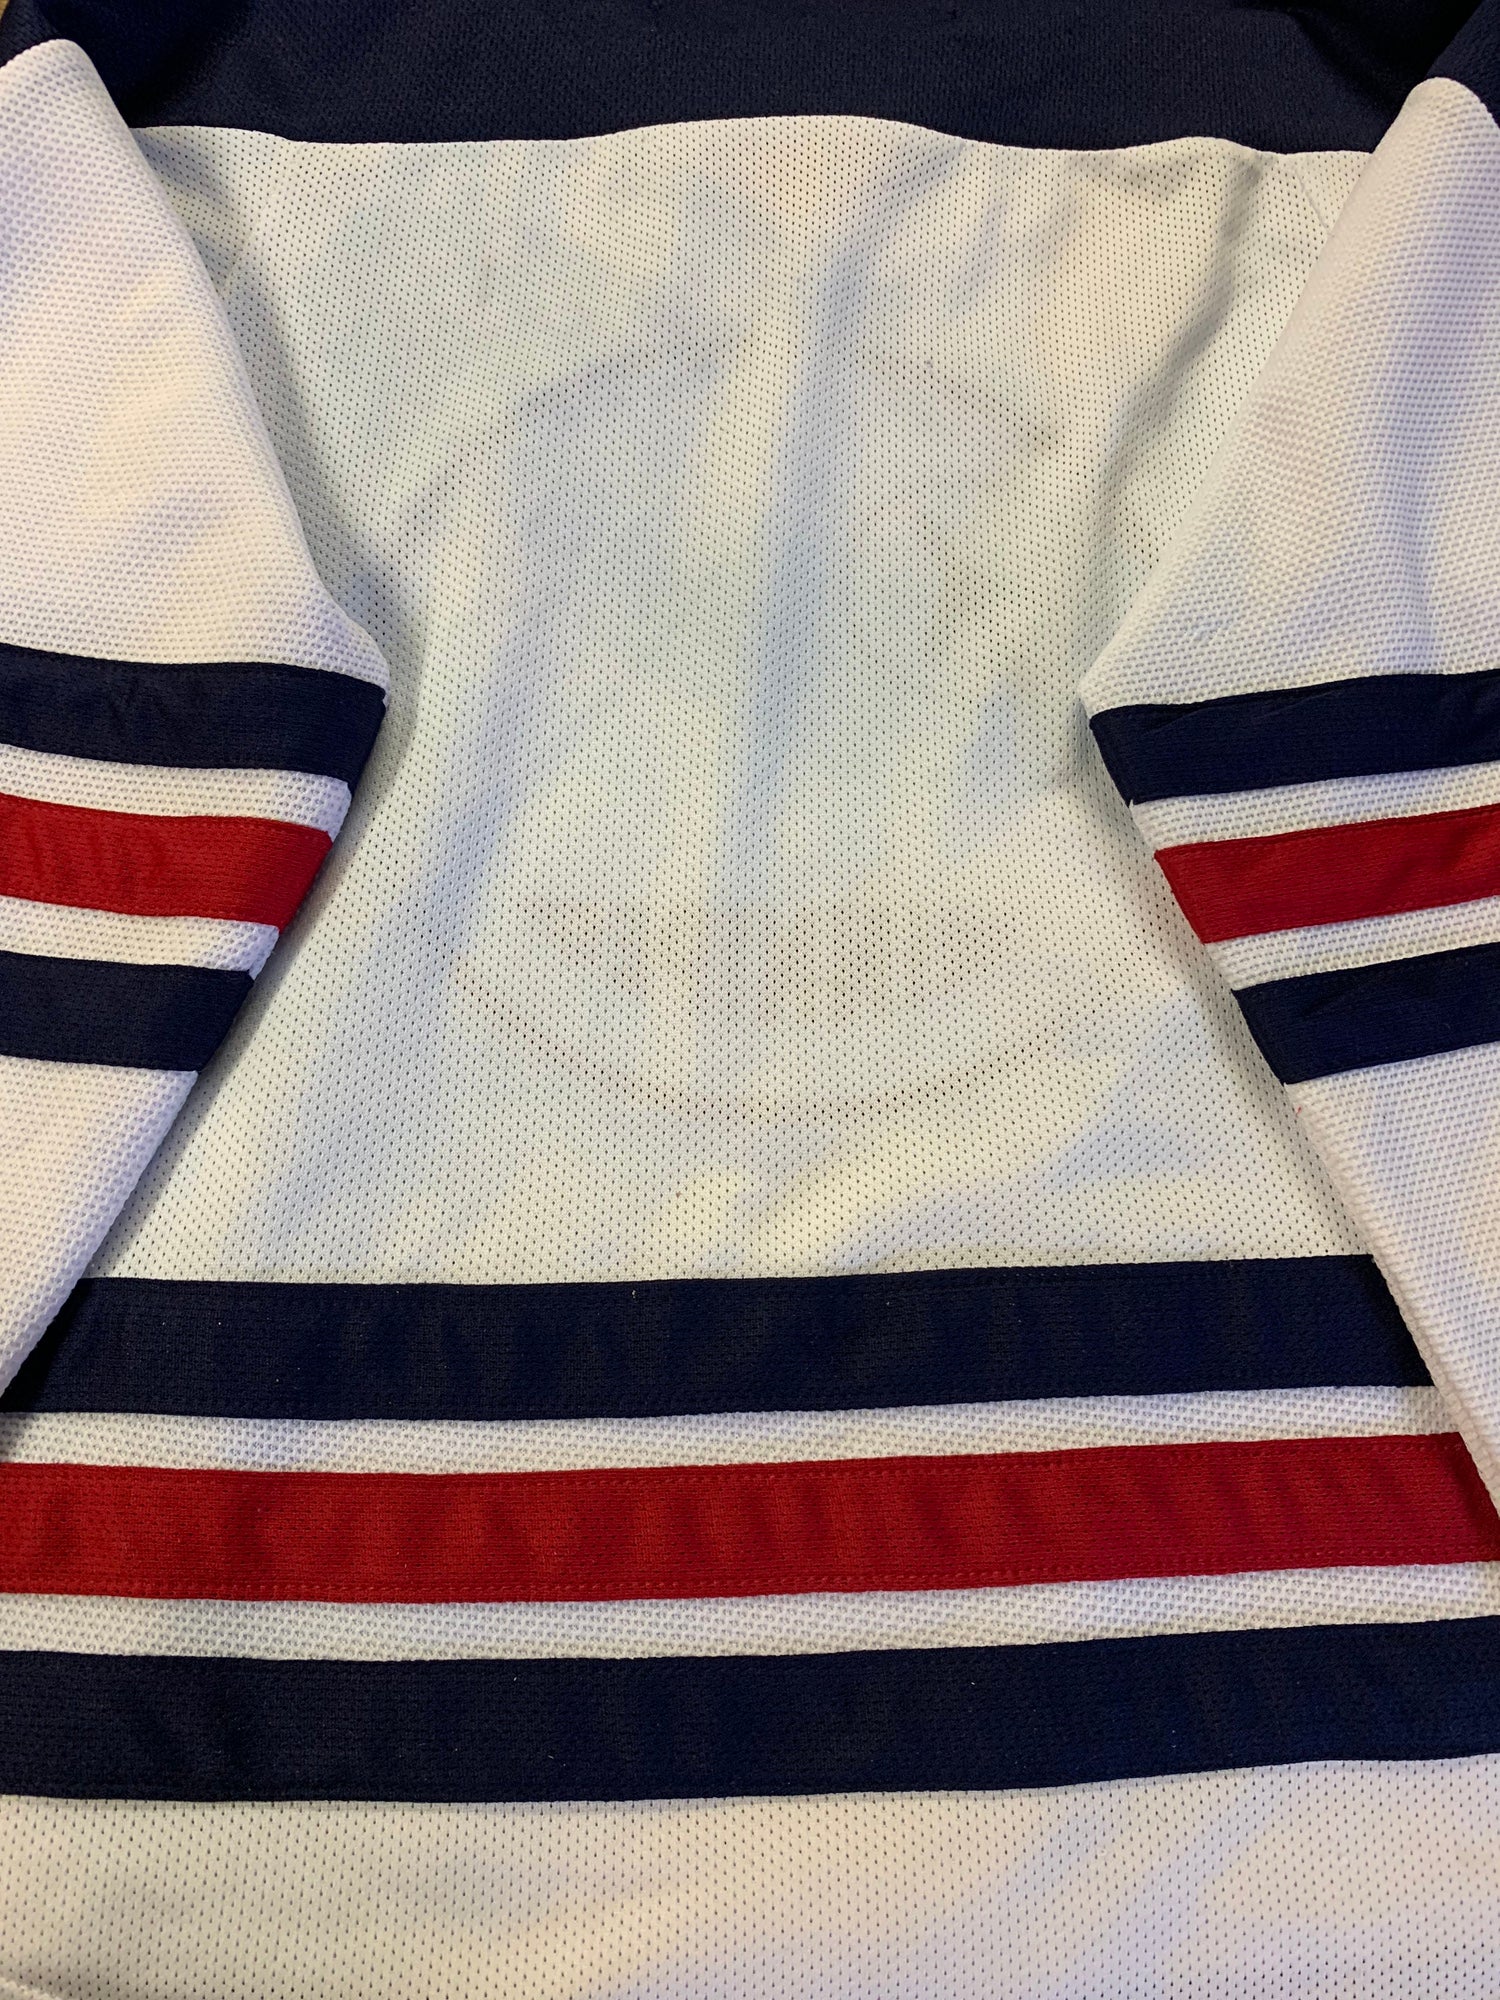 nhl jets heritage classic jersey Cheap Sell - OFF 66%